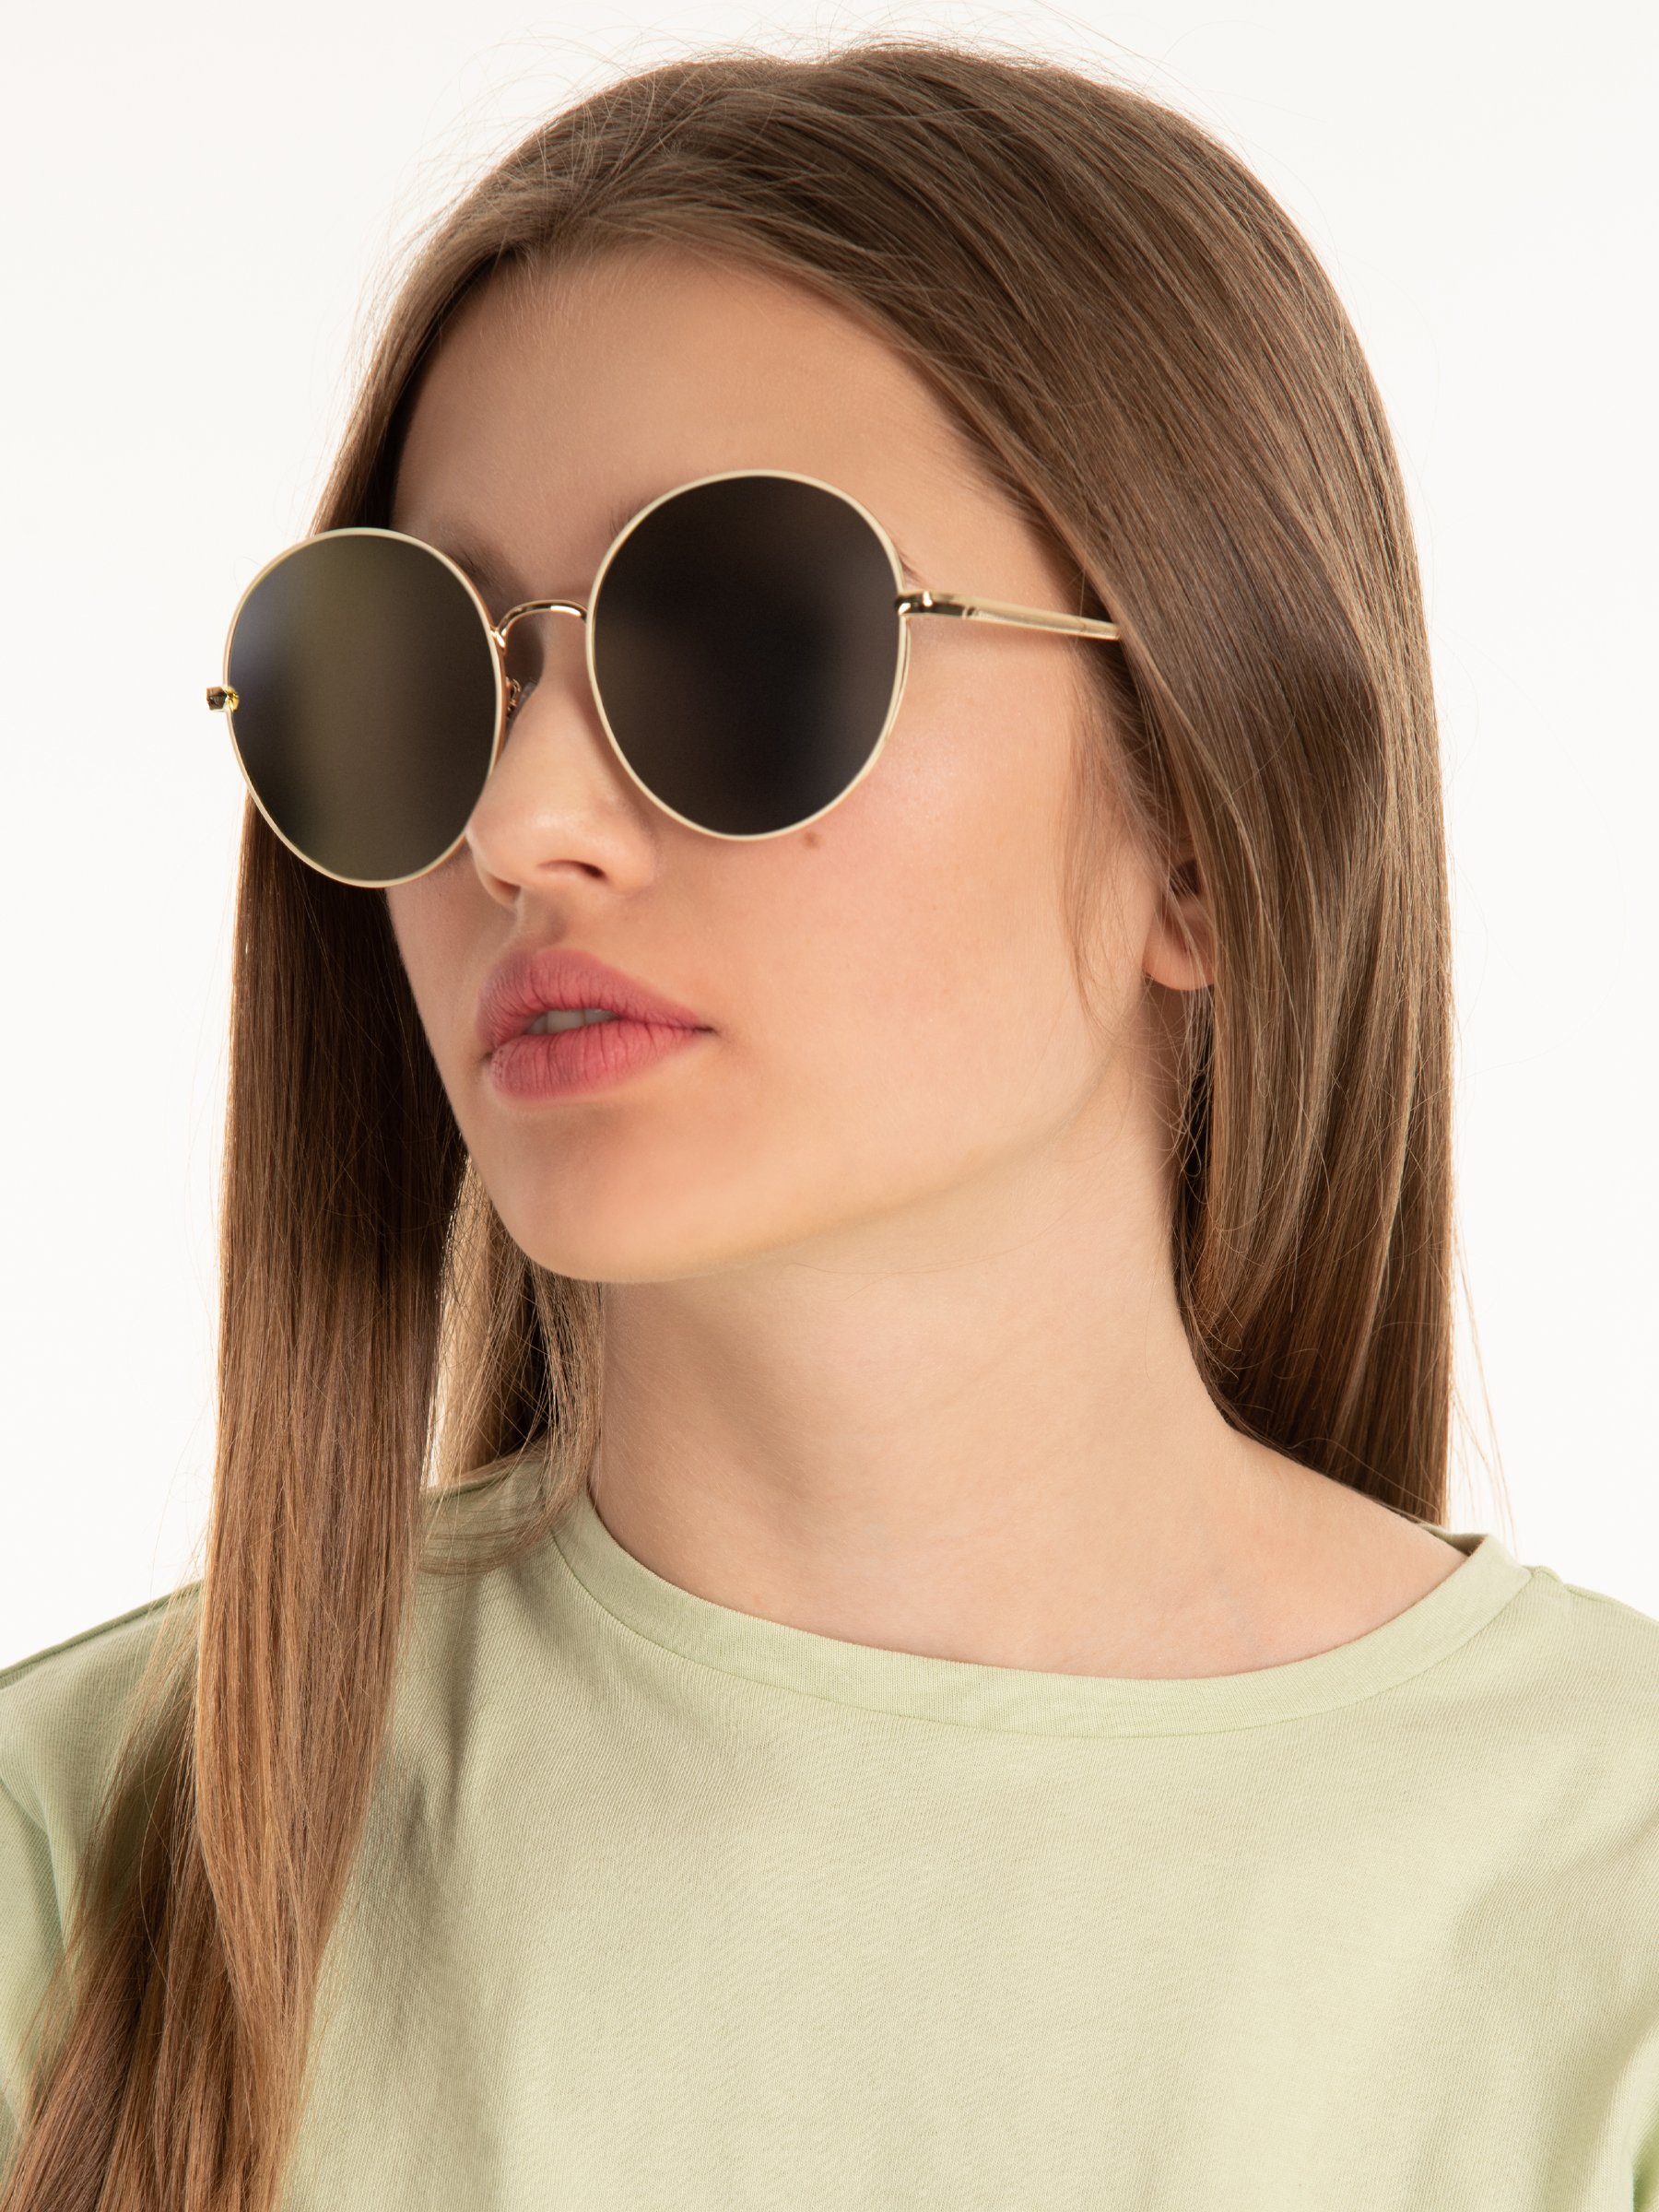 10 Factors to Consider When Buying Sunglasses – Kraywoods